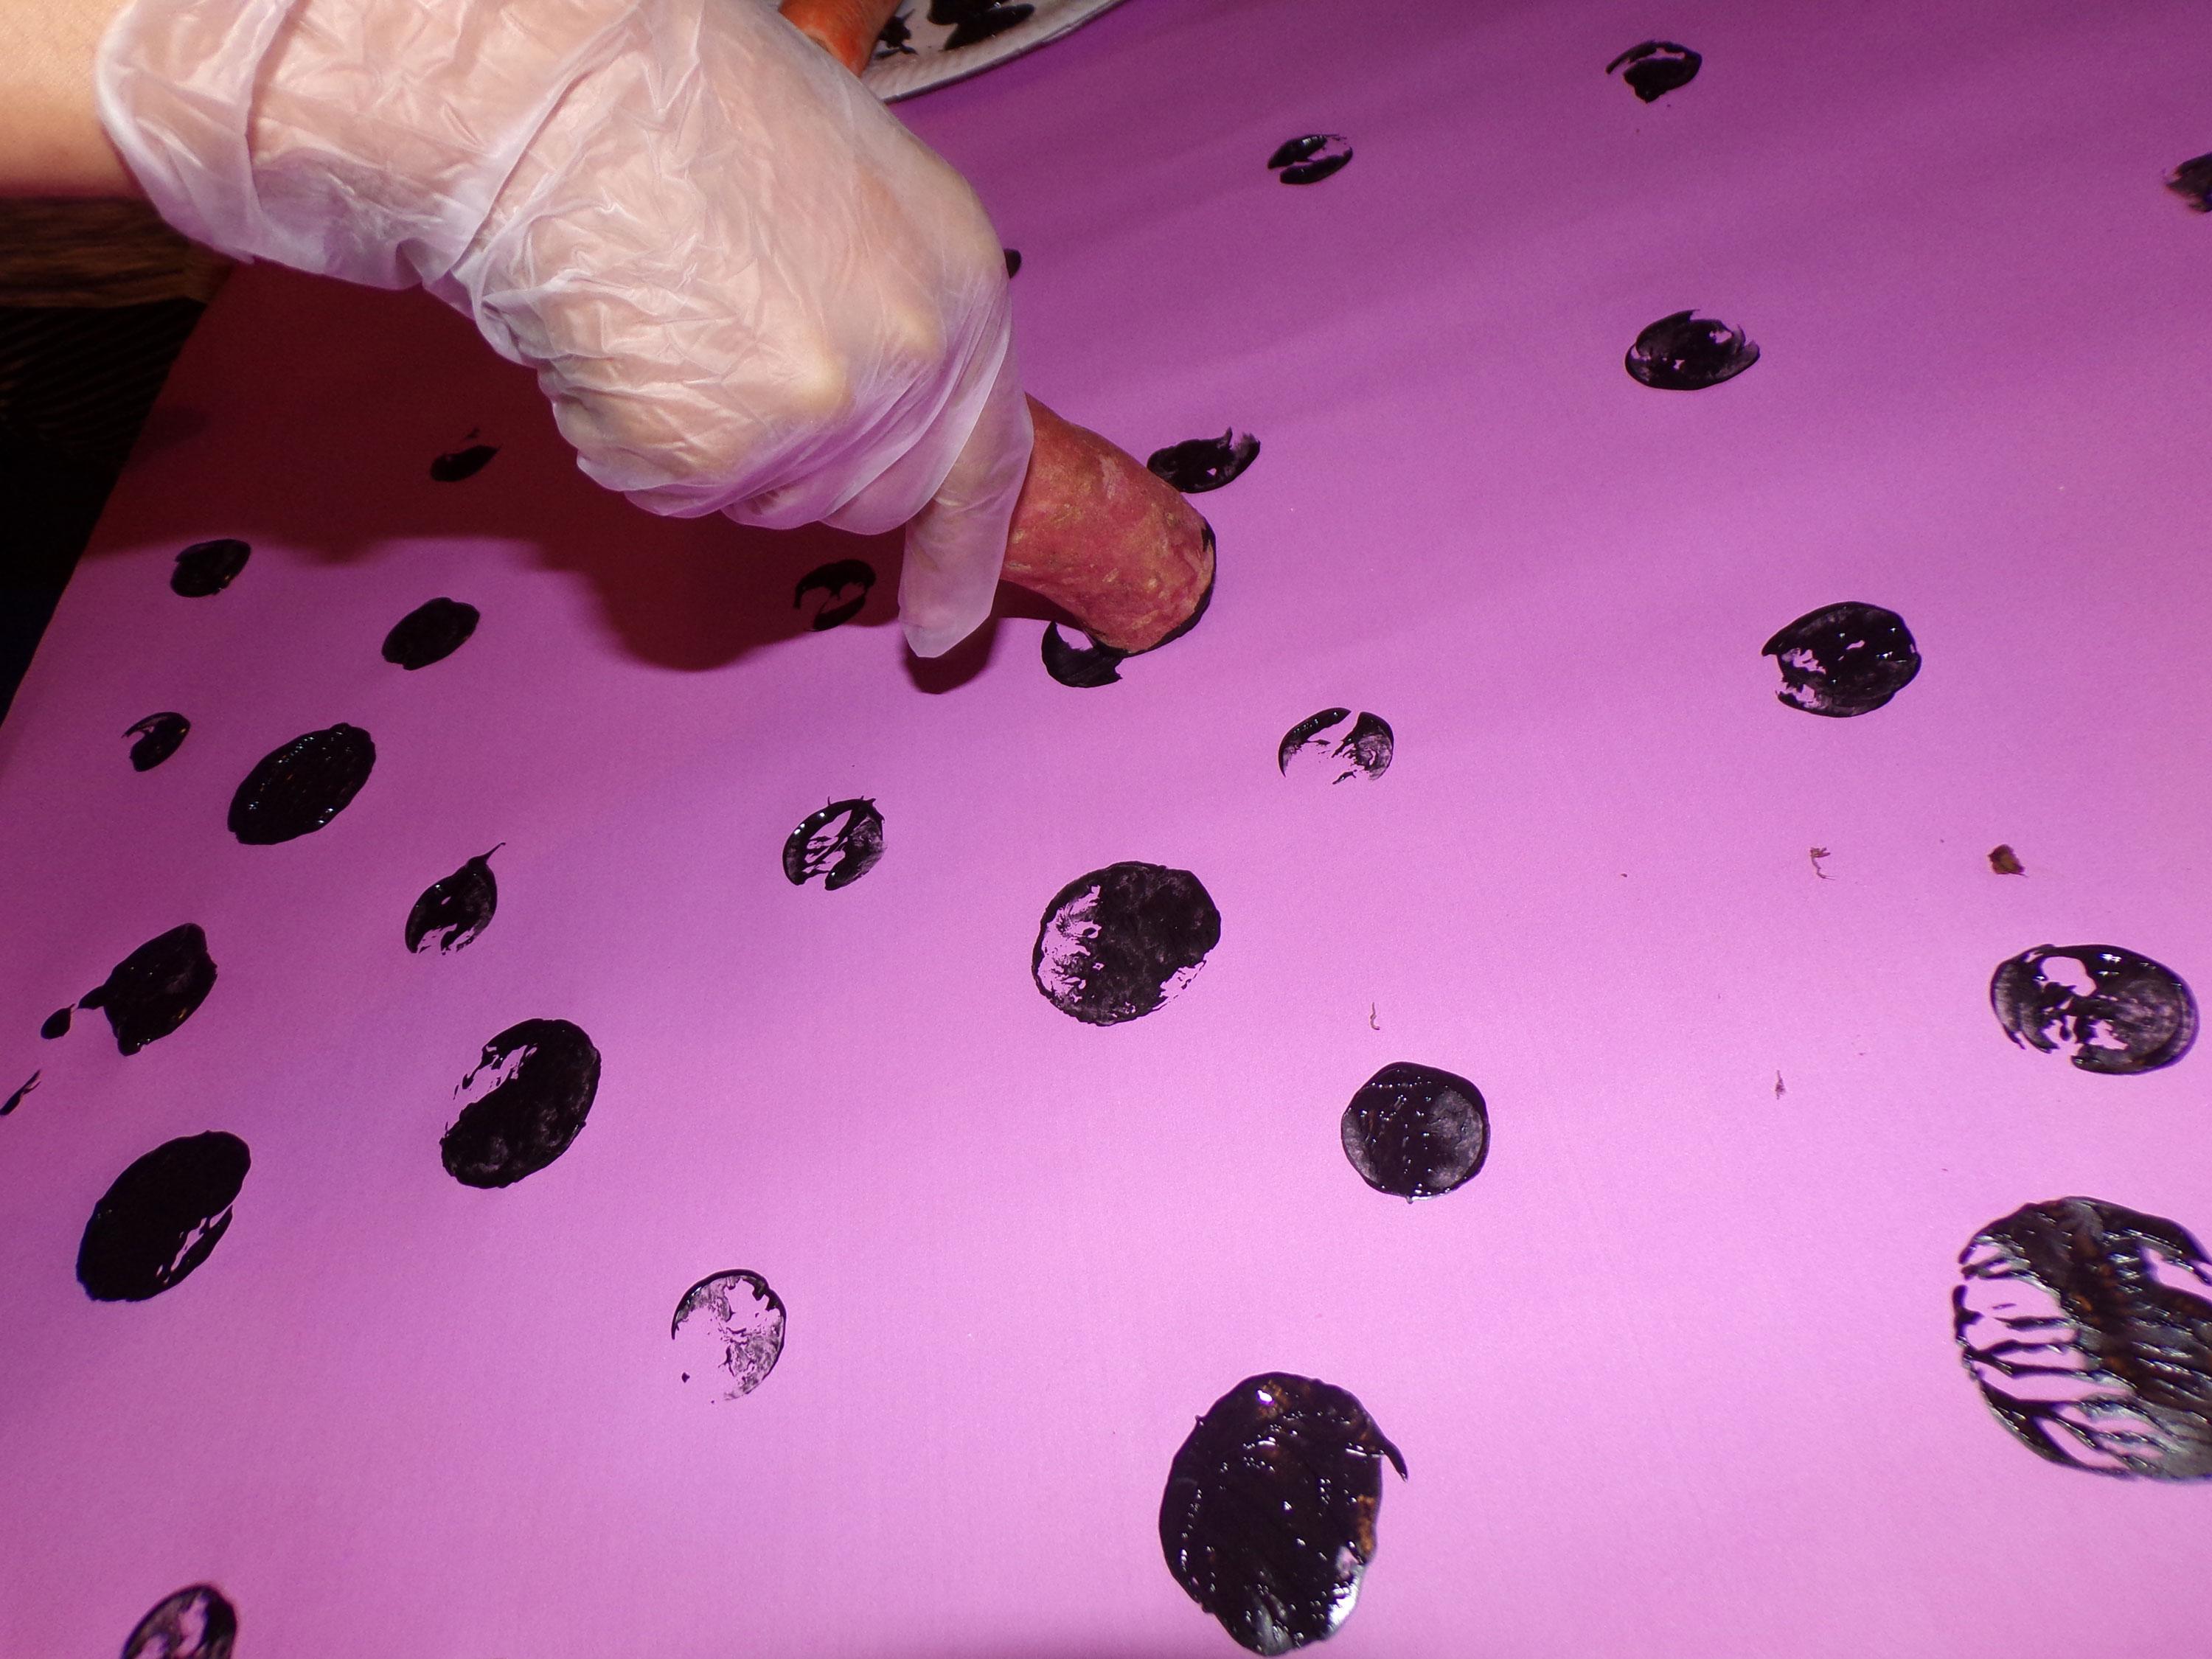 A close-up of a hand using a carrot to create a pattern of black dots on pink paper